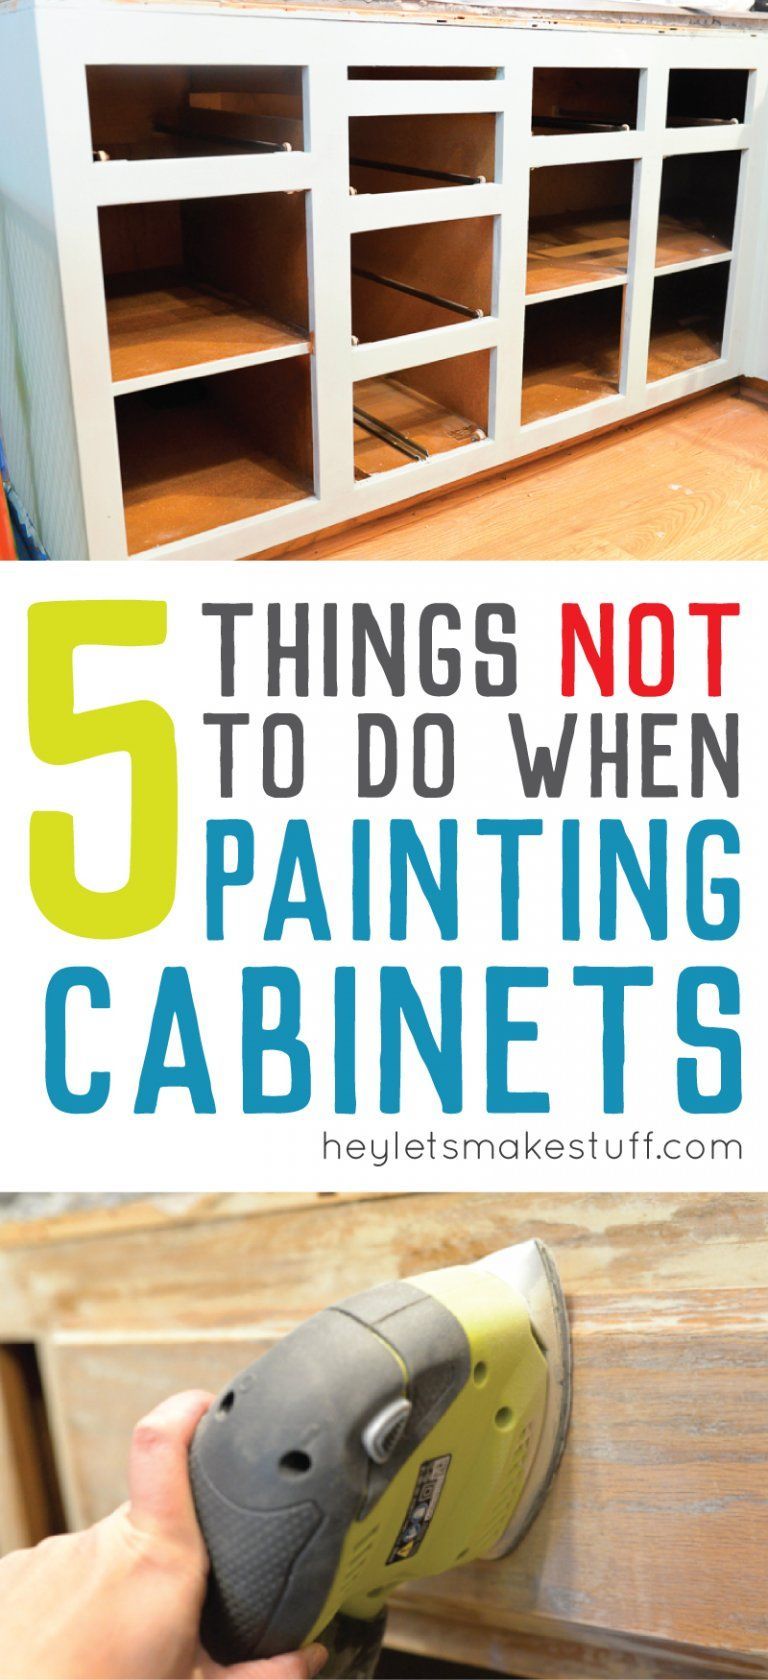 5 Mistakes to Avoid when Painting Cabinets -   23 diy painting rooms
 ideas